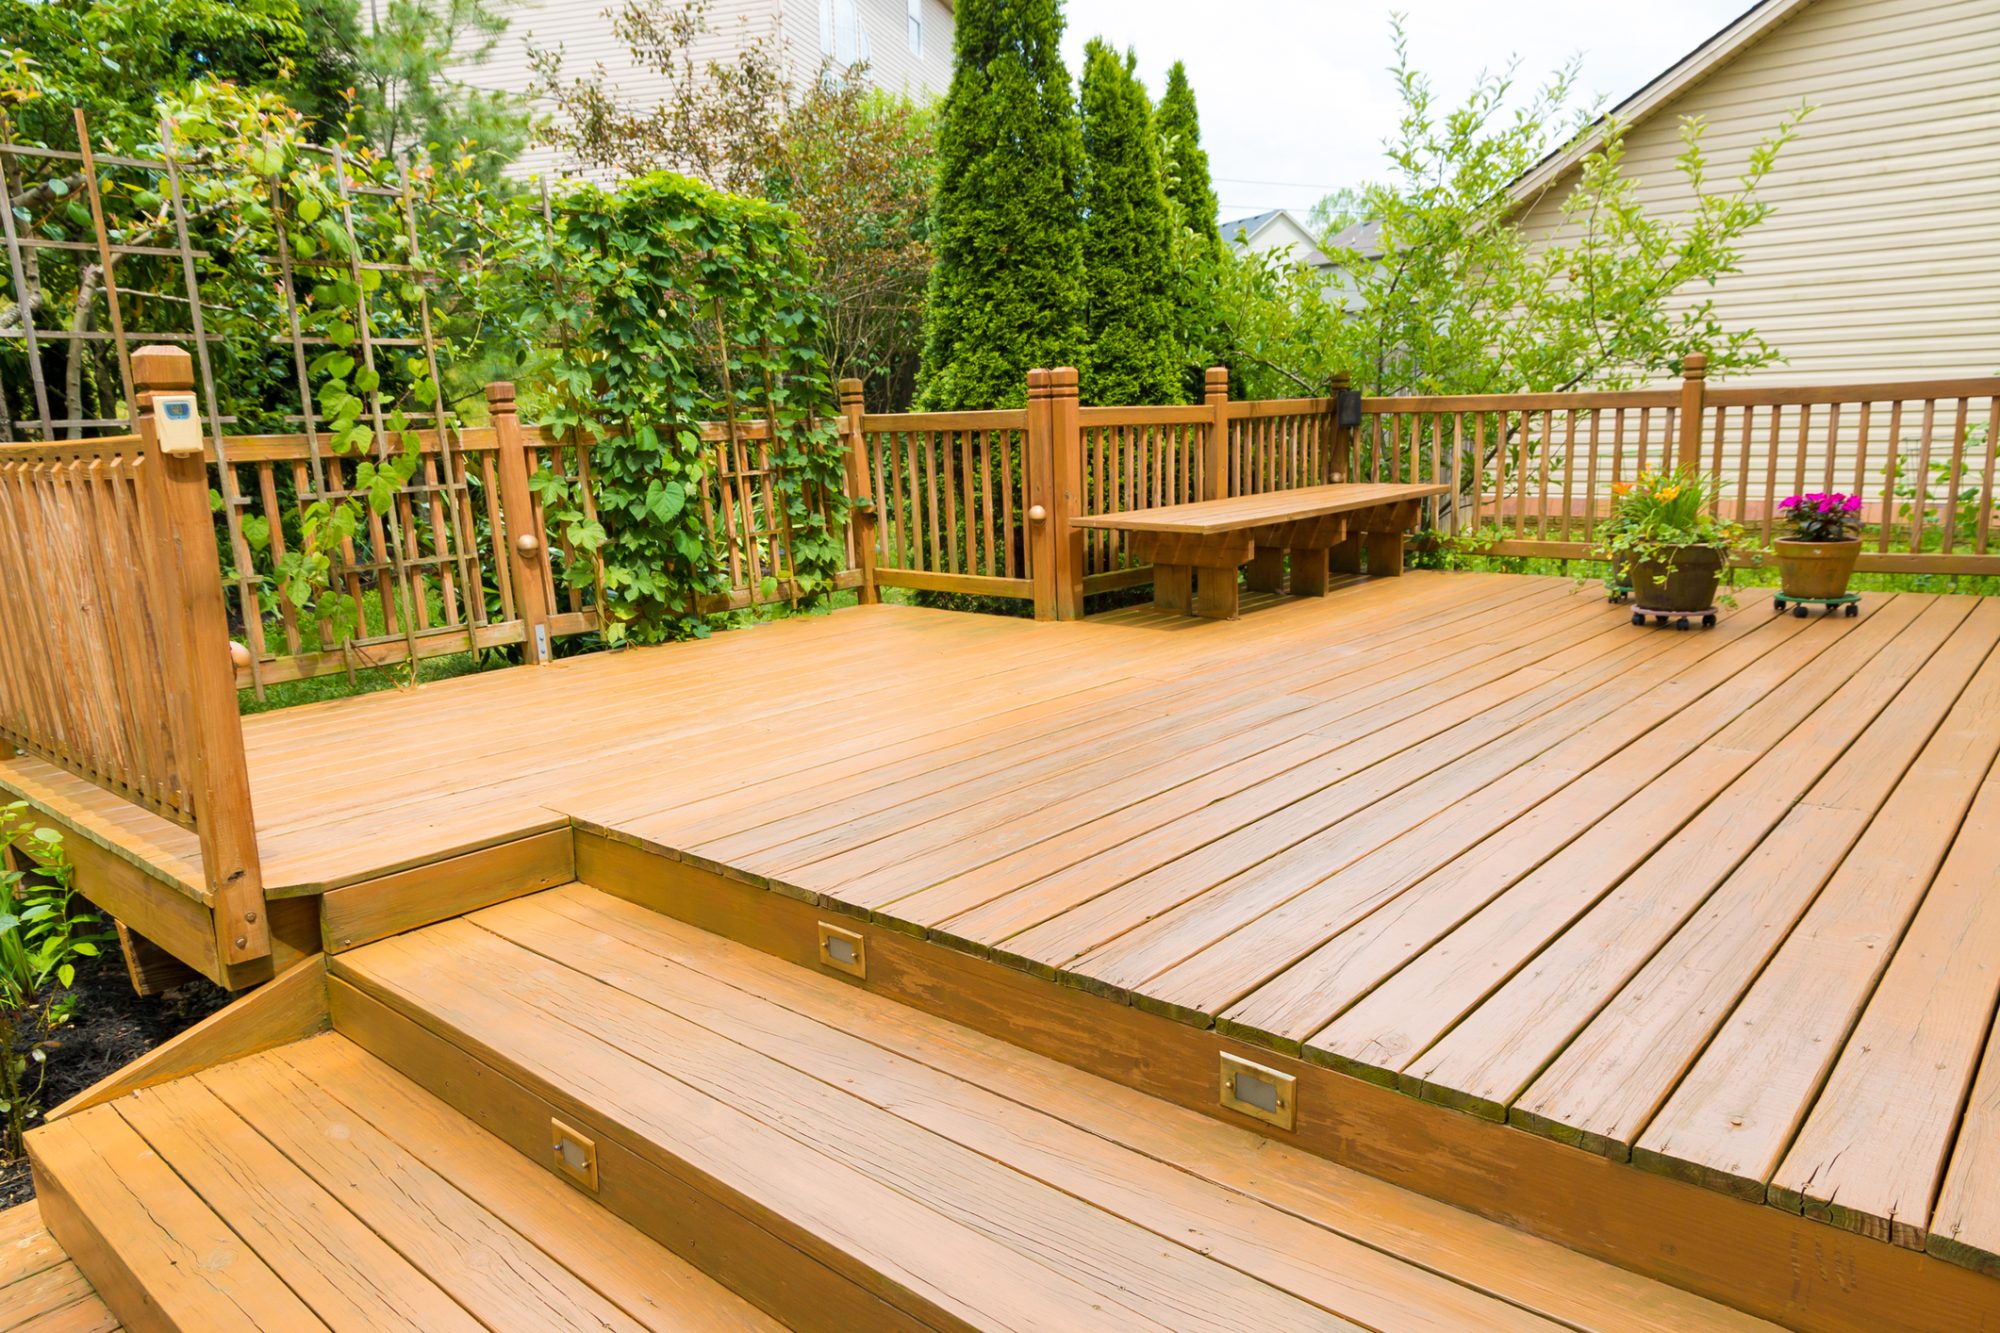 Wooden deck of family home at summer time.